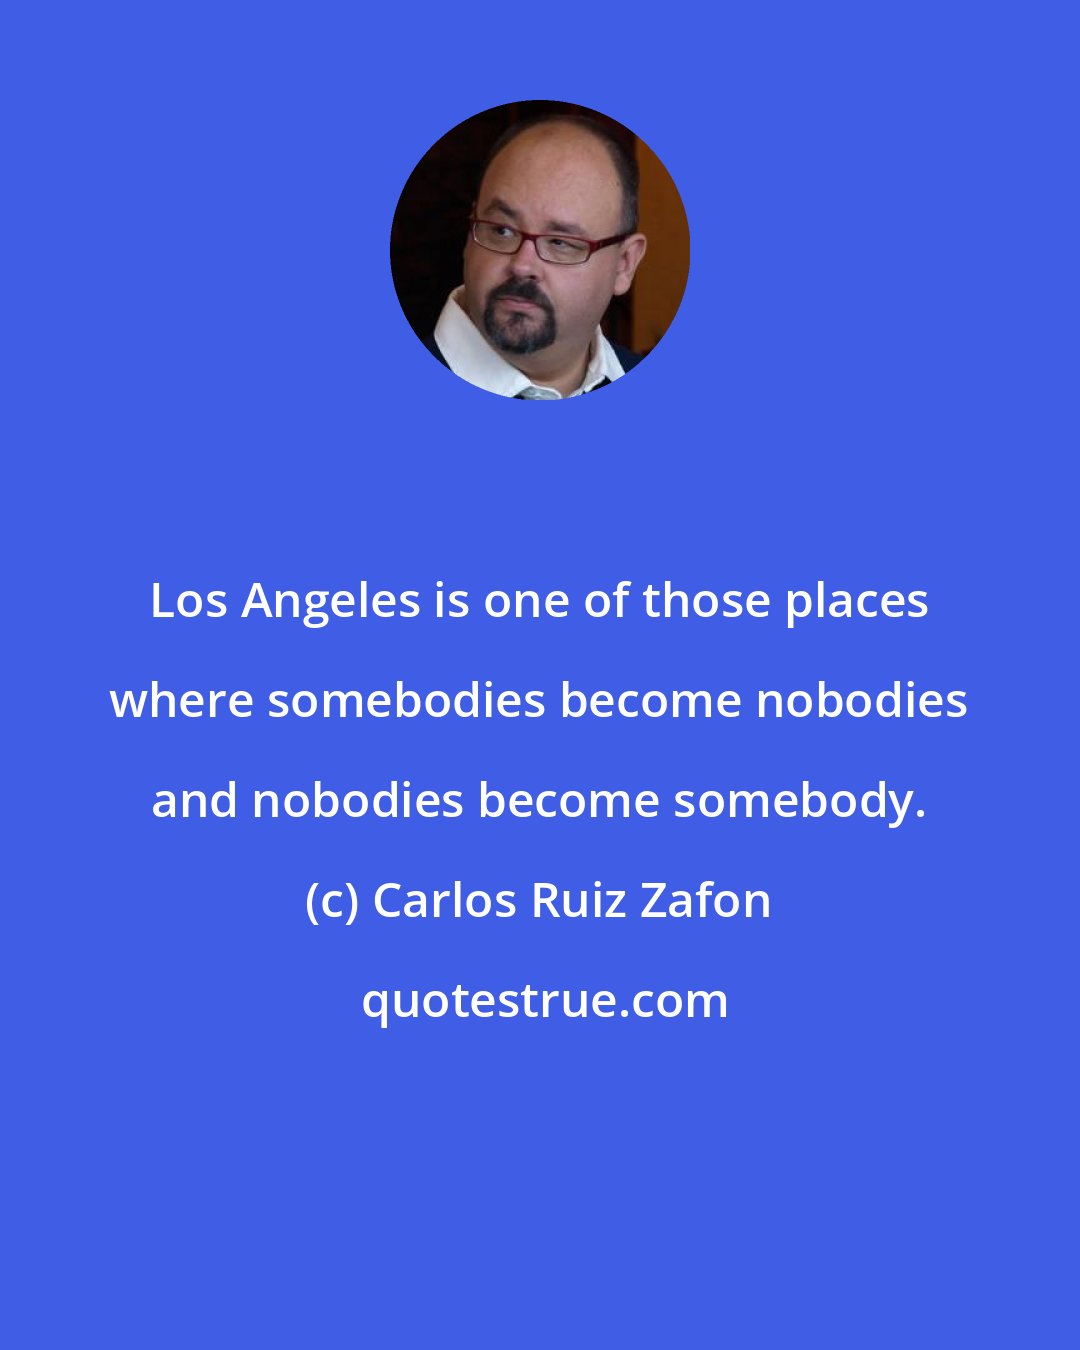 Carlos Ruiz Zafon: Los Angeles is one of those places where somebodies become nobodies and nobodies become somebody.